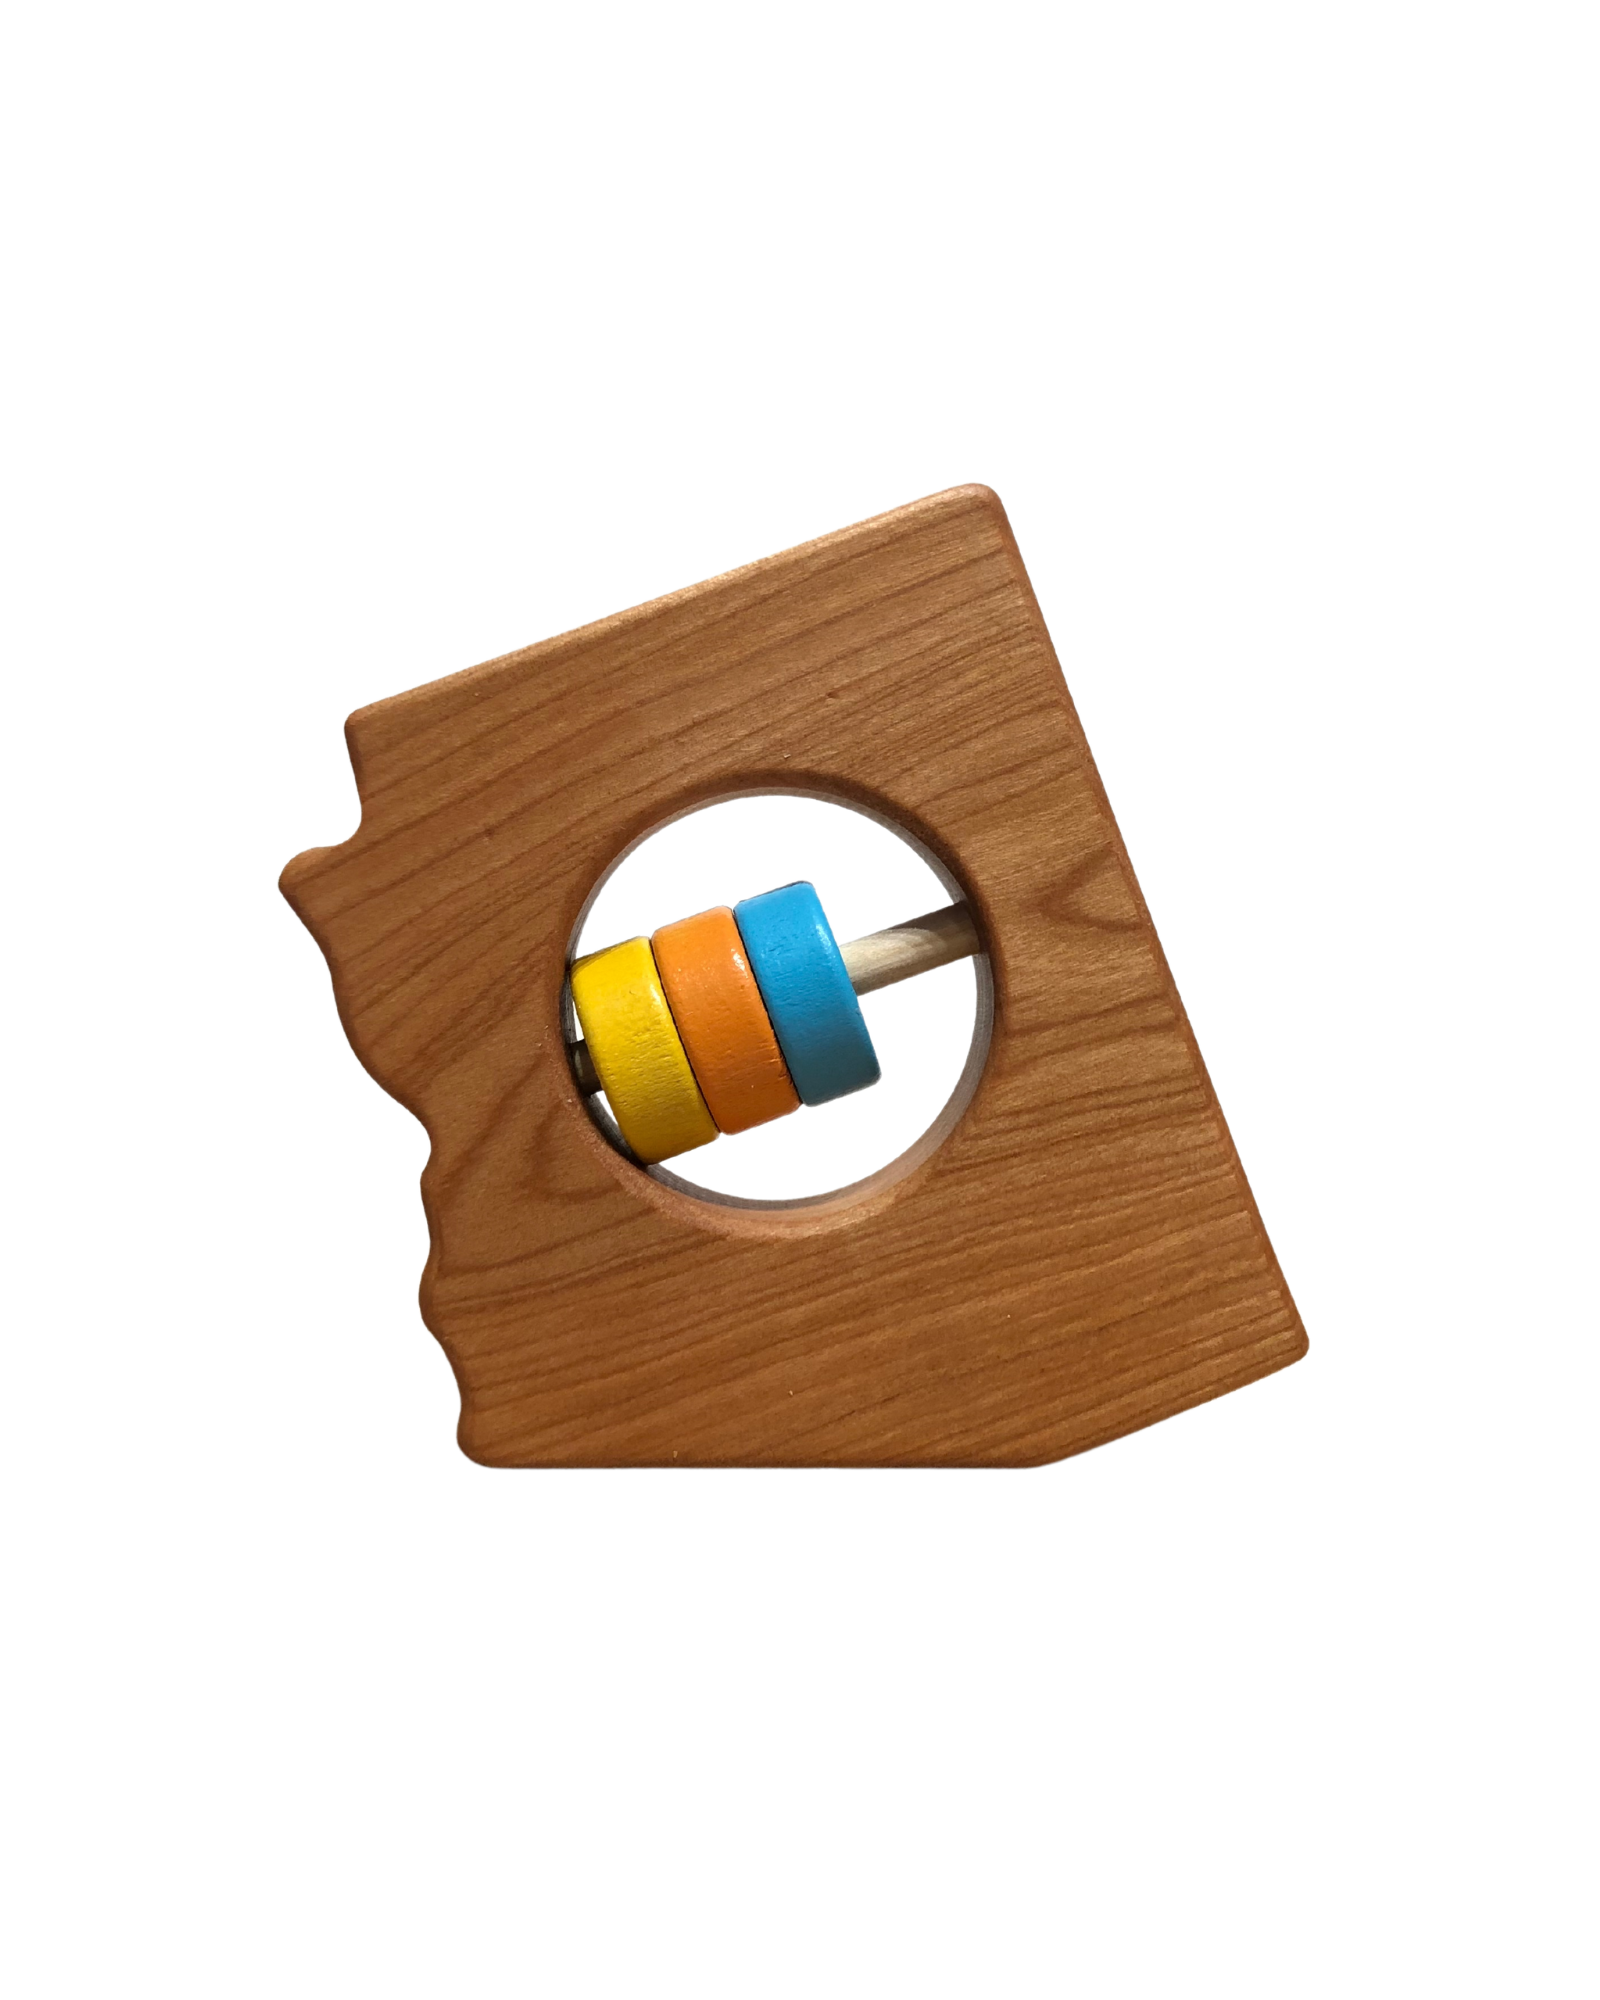 Light wood rattle in the shape of arizona with a cutout in the center and a dowel with yellow, orange, and blue wooden beads